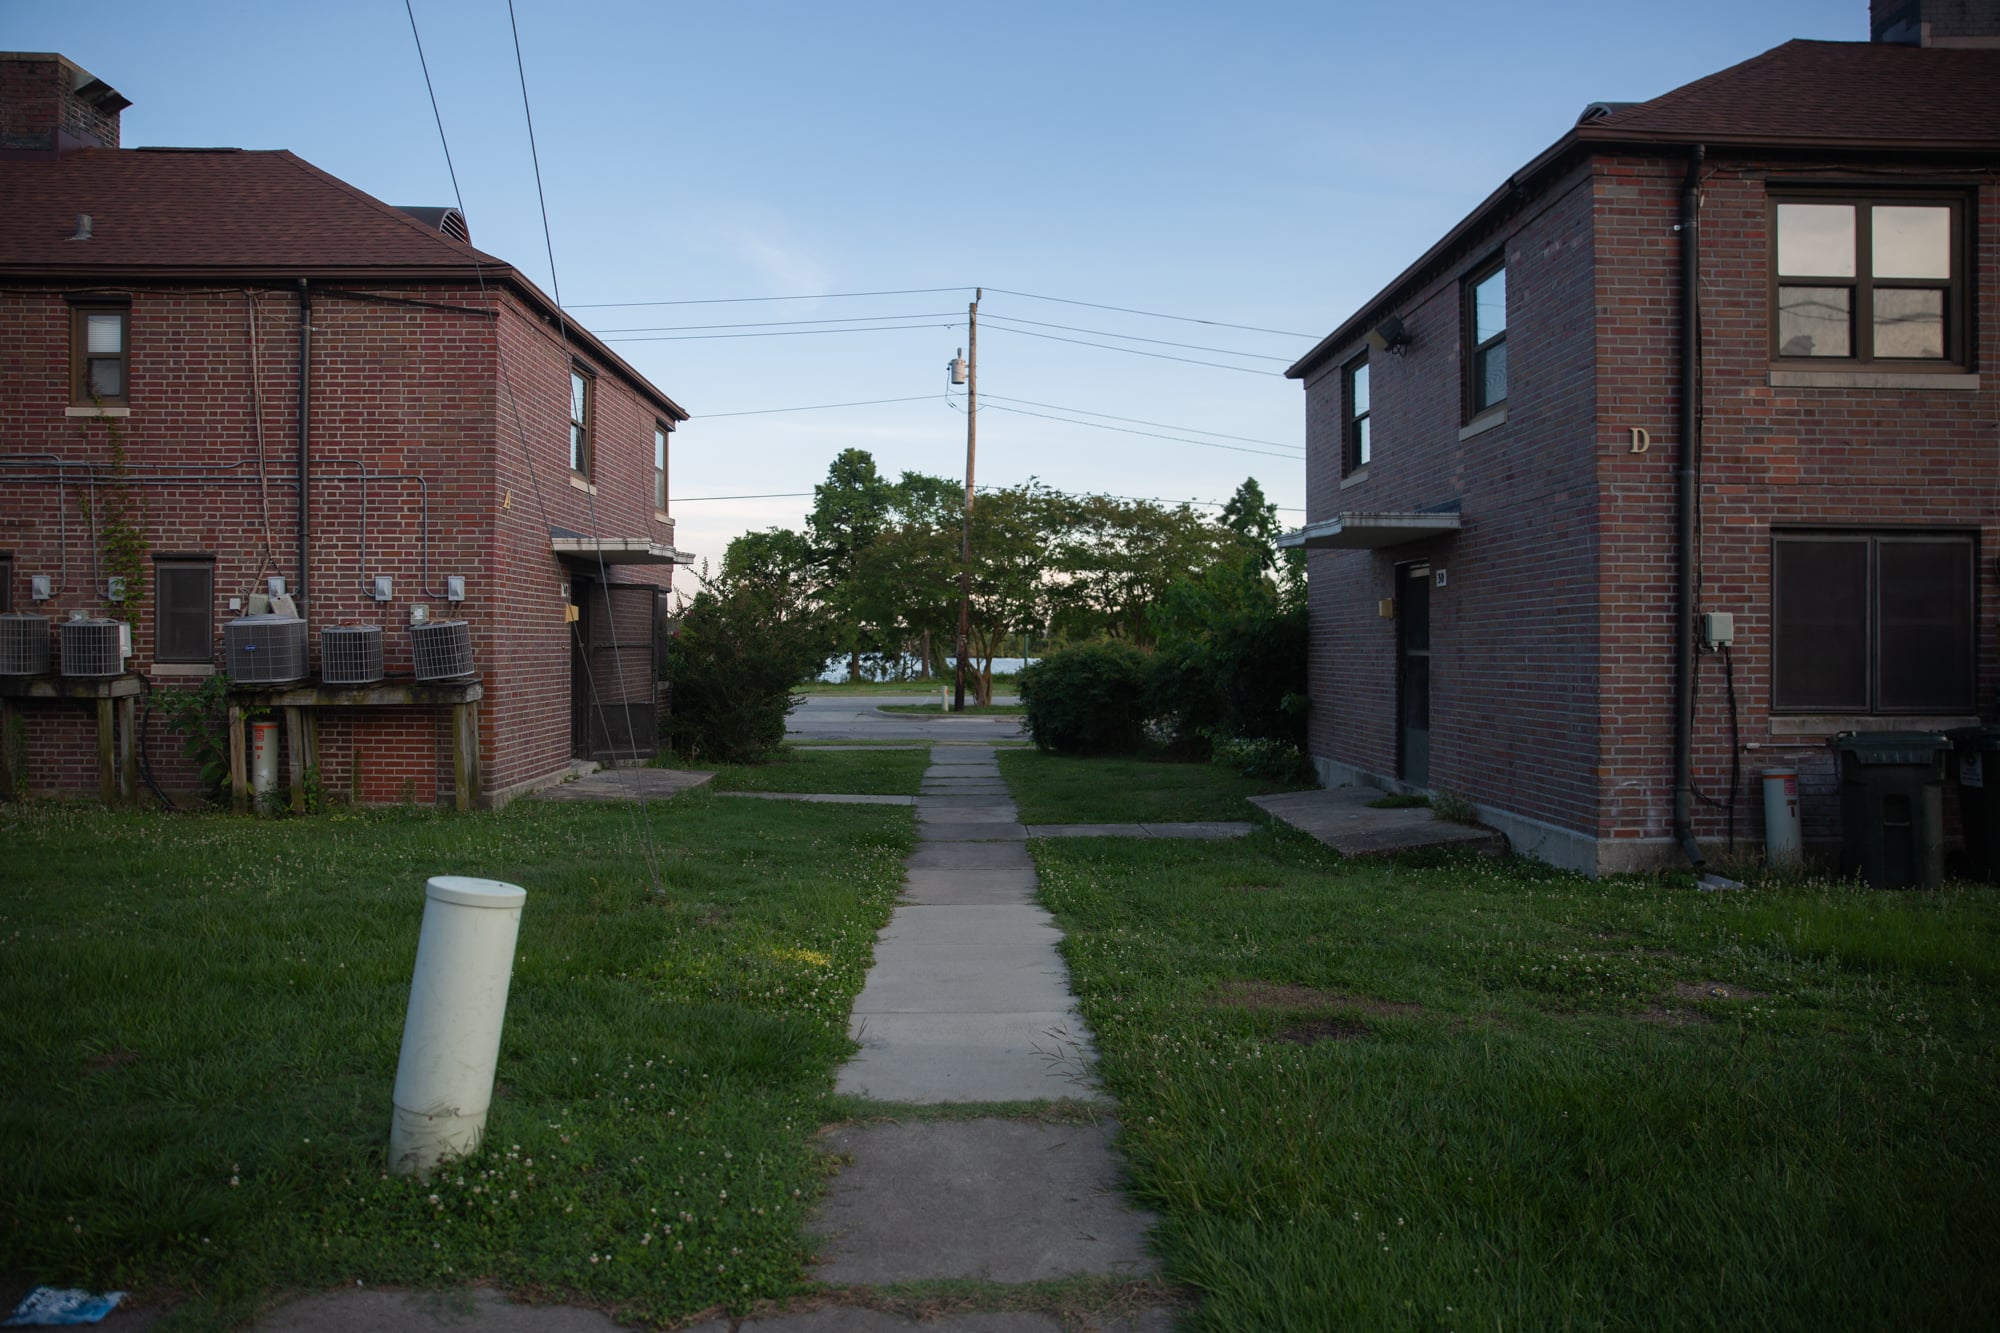 Trent Court, a low-income housing project in New Bern, North Carolina, was swamped when the Trent River overflowed its banks in 2018. Half of the 200 or so apartments are abandoned and scheduled for demolition. (Harrison Mantas/ News21)